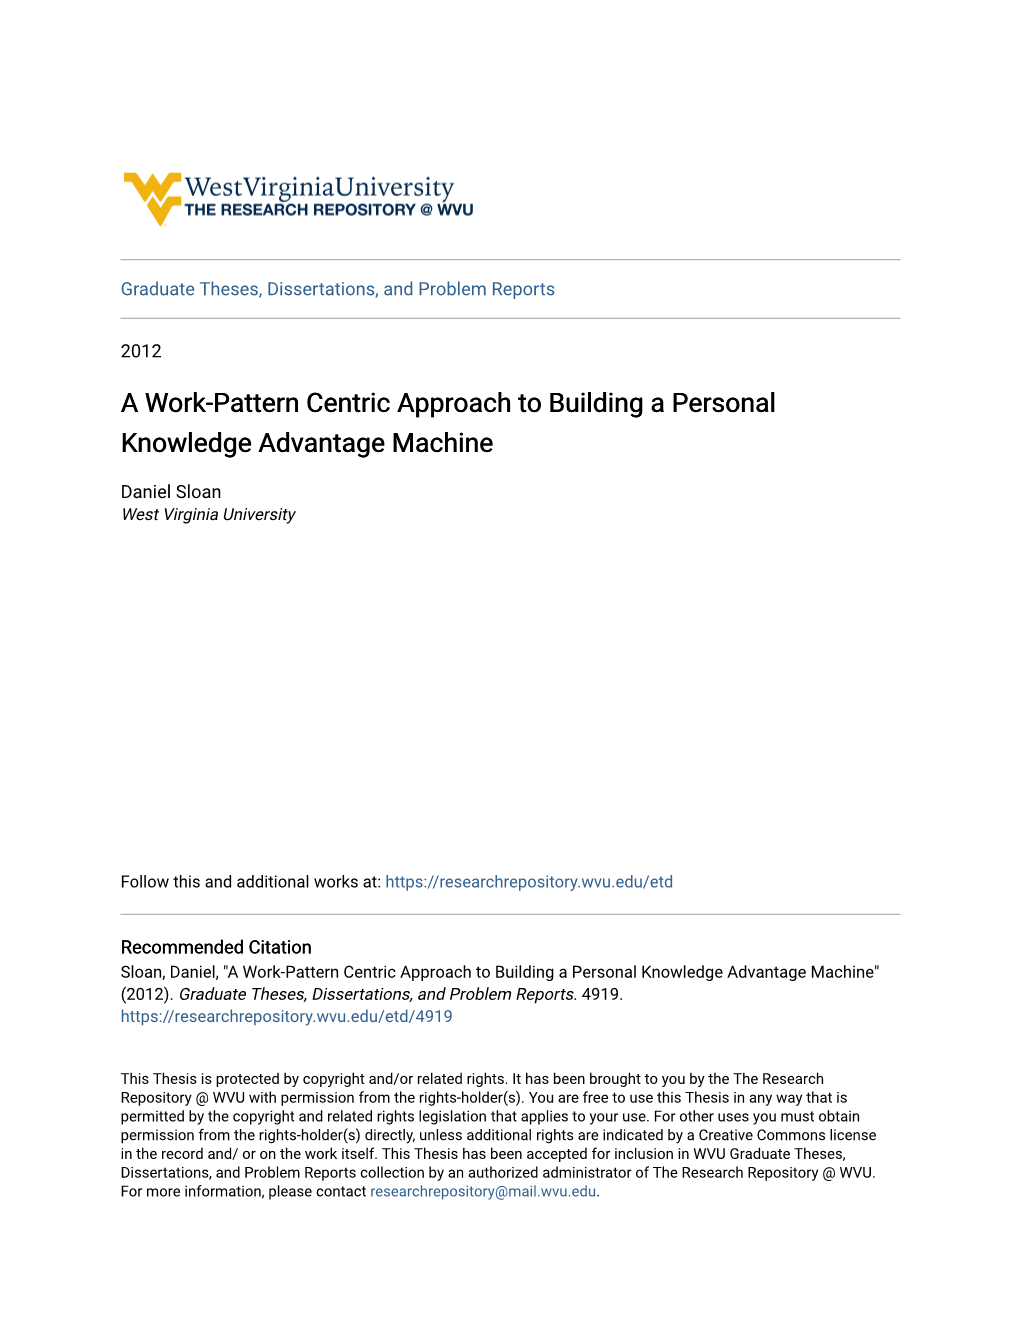 A Work-Pattern Centric Approach to Building a Personal Knowledge Advantage Machine